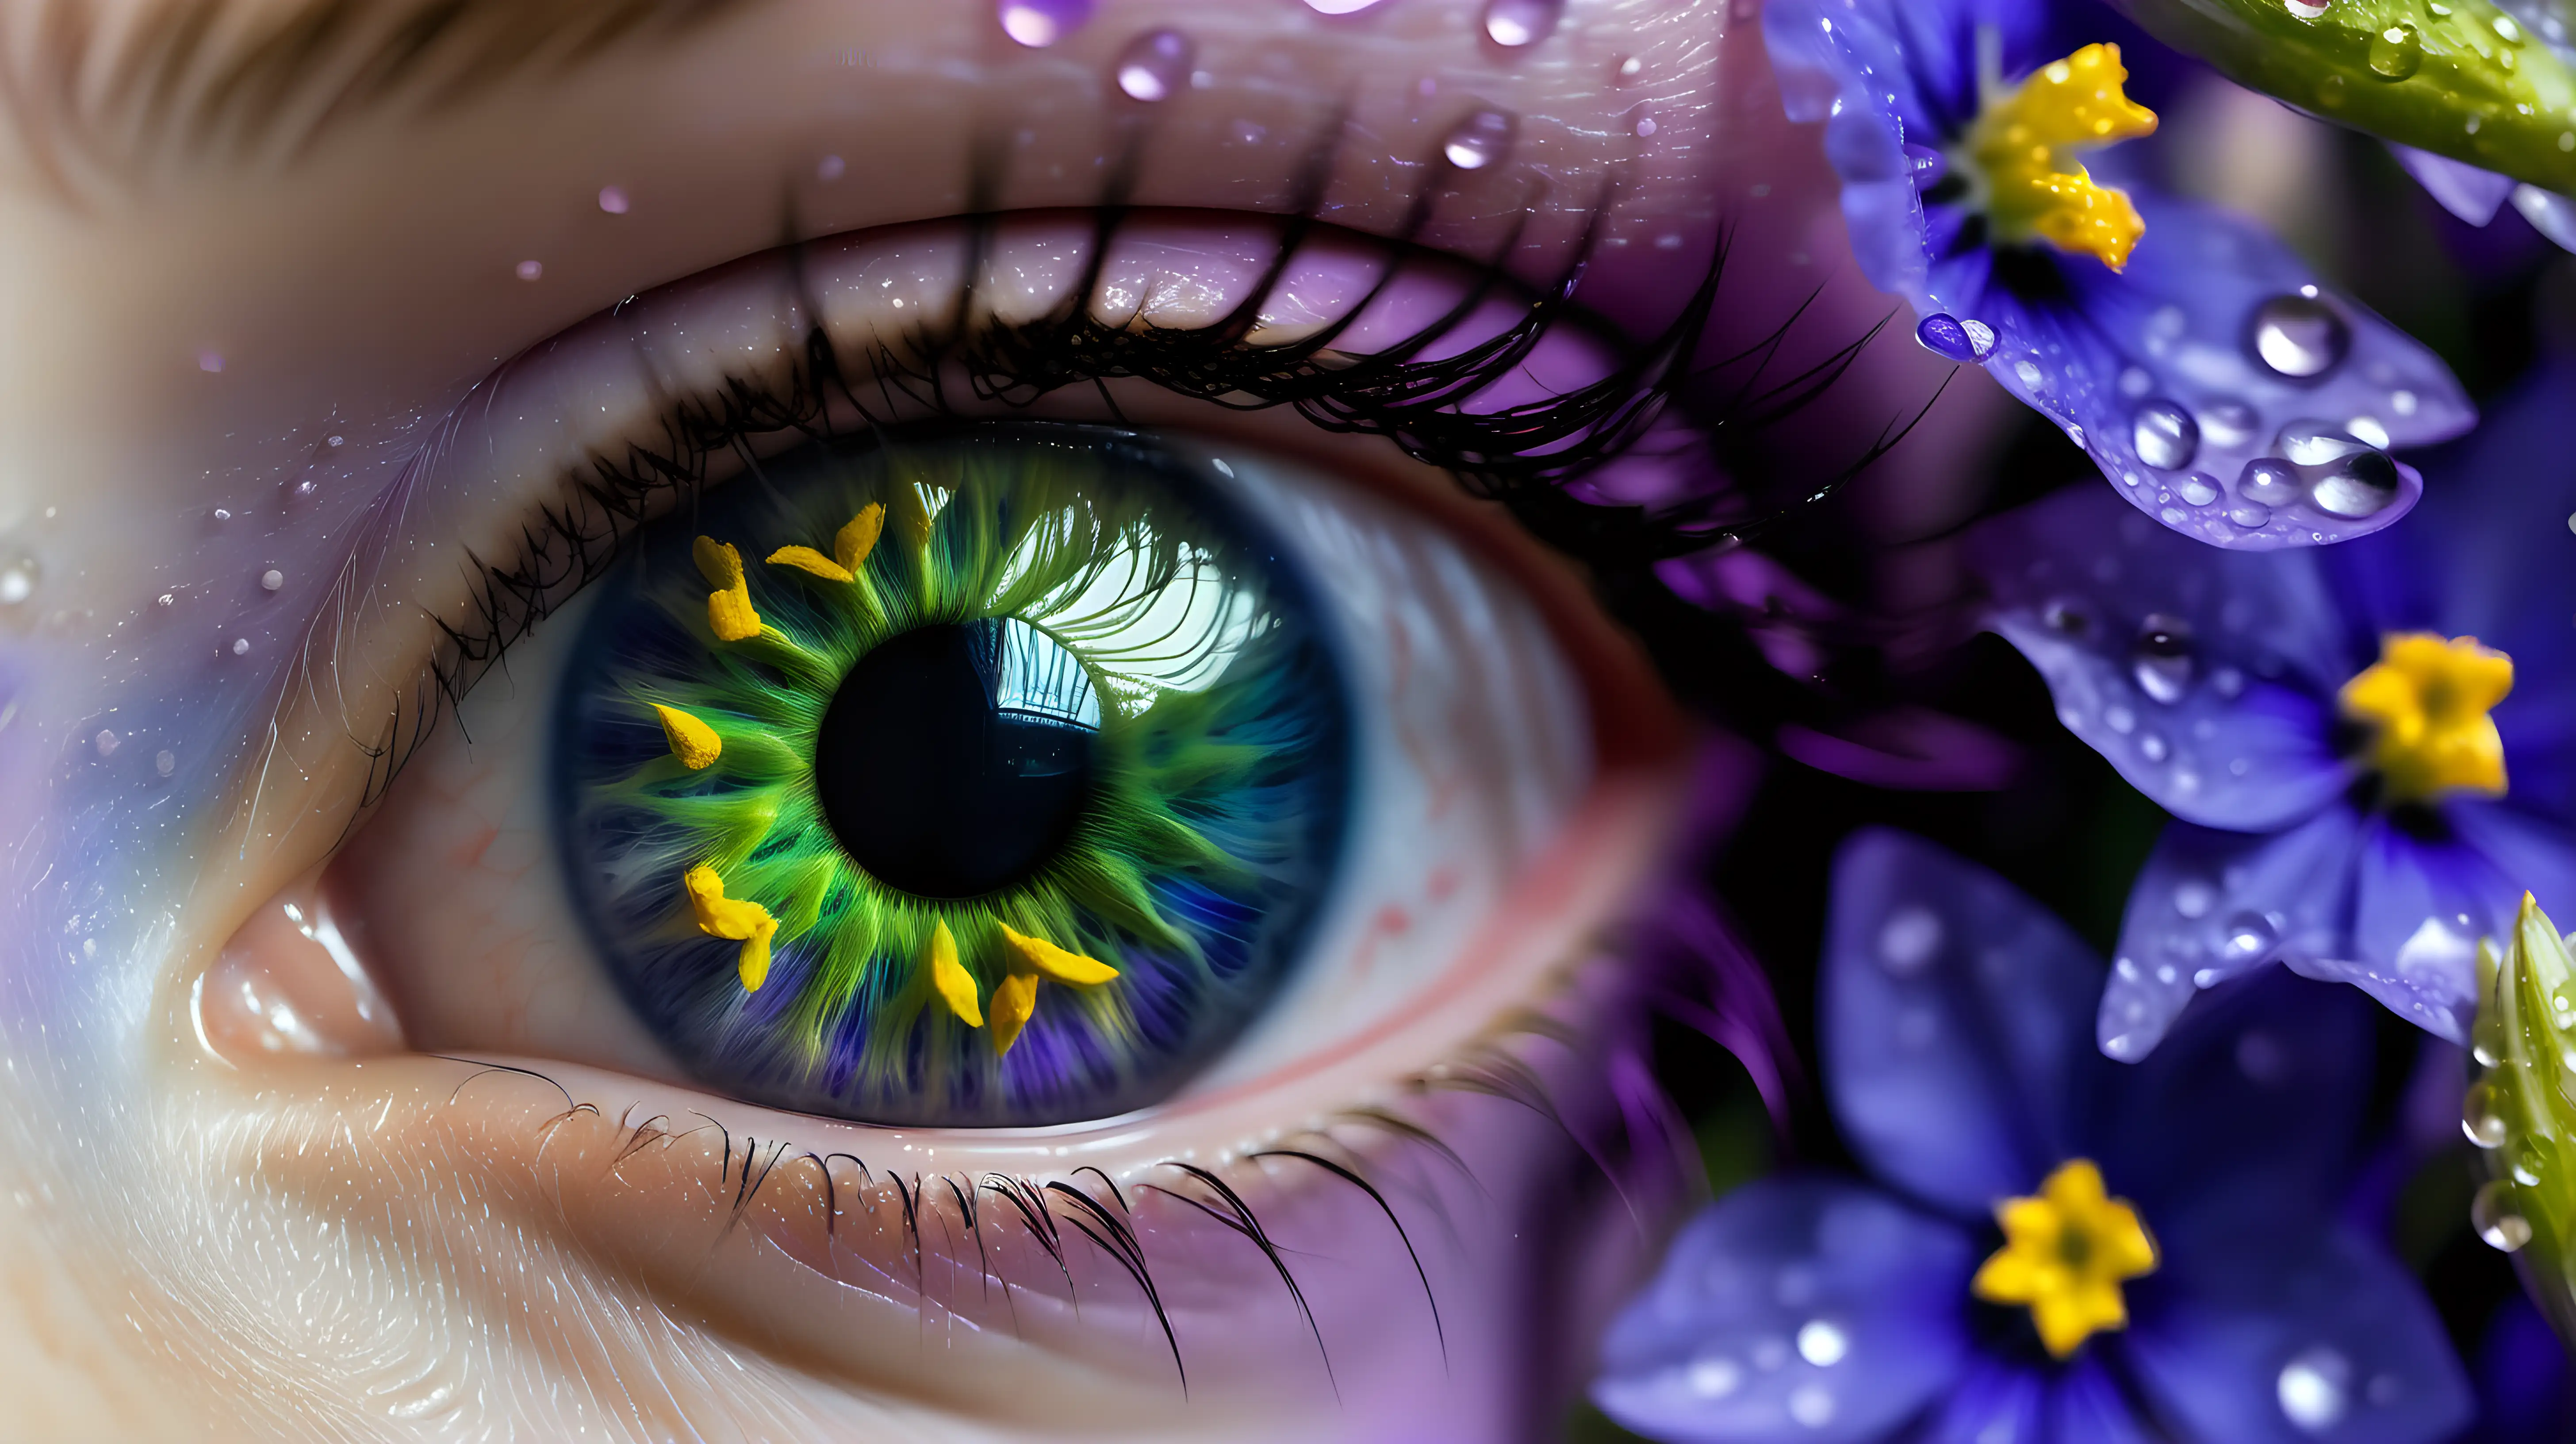 /imagine prompt: A macro photograph of a green eye, flecked with golden hues, amidst a blooming garden of violet and indigo flowers, with gentle raindrops visible on the eyelashes. Created Using: Vivid color contrasts, hyper-realistic textures, serene expression, nature-inspired hues, clear focus on the eye, blurred floral background, reflective water droplets, tranquil atmosphere --ar 3:4 --v 6.0